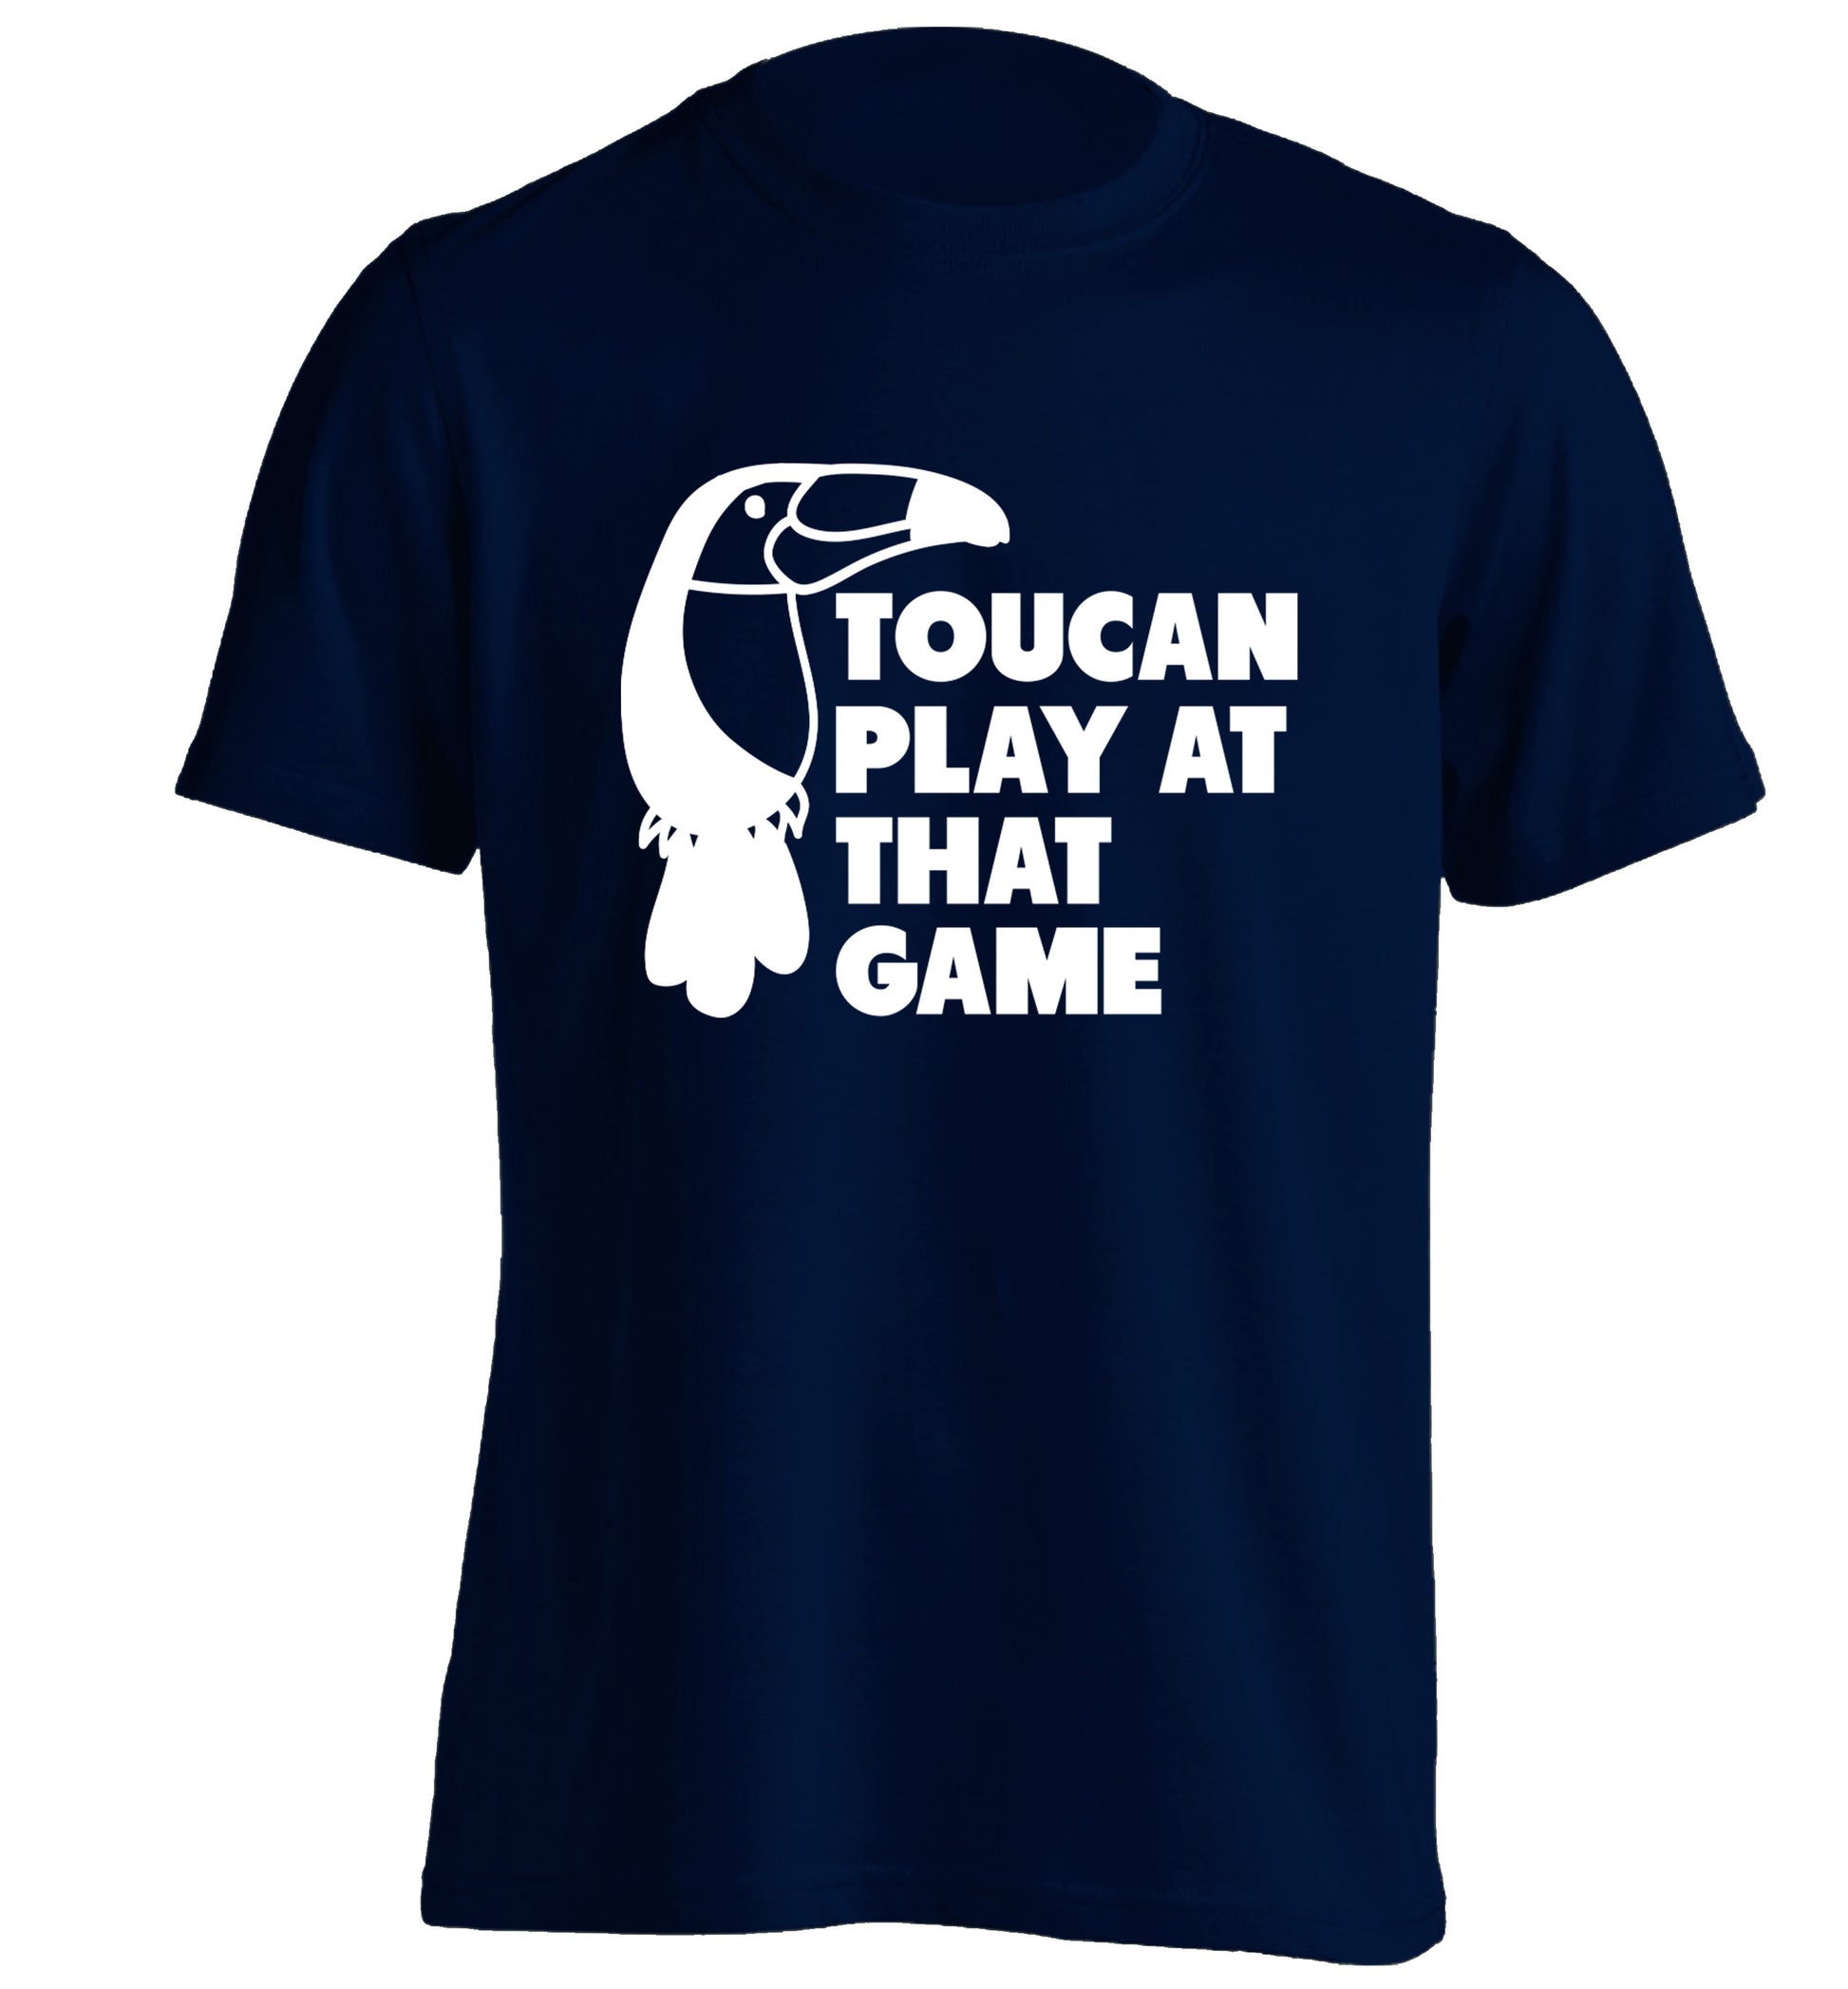 Toucan play at that game adults unisex navy Tshirt 2XL